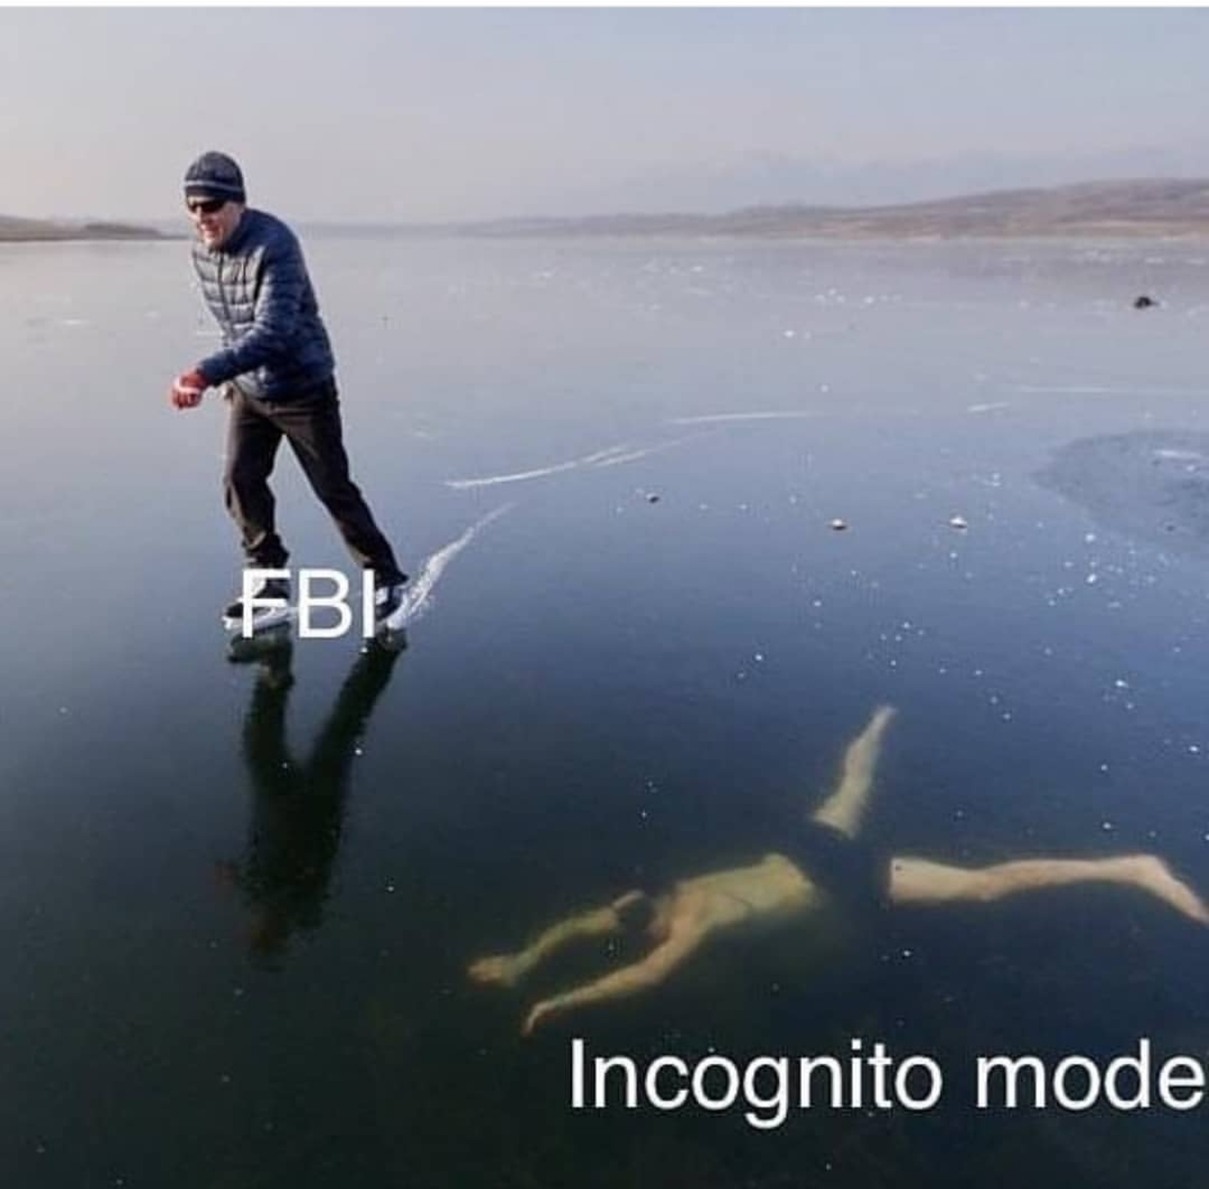 Meme depicting misconceptions about incognito mode